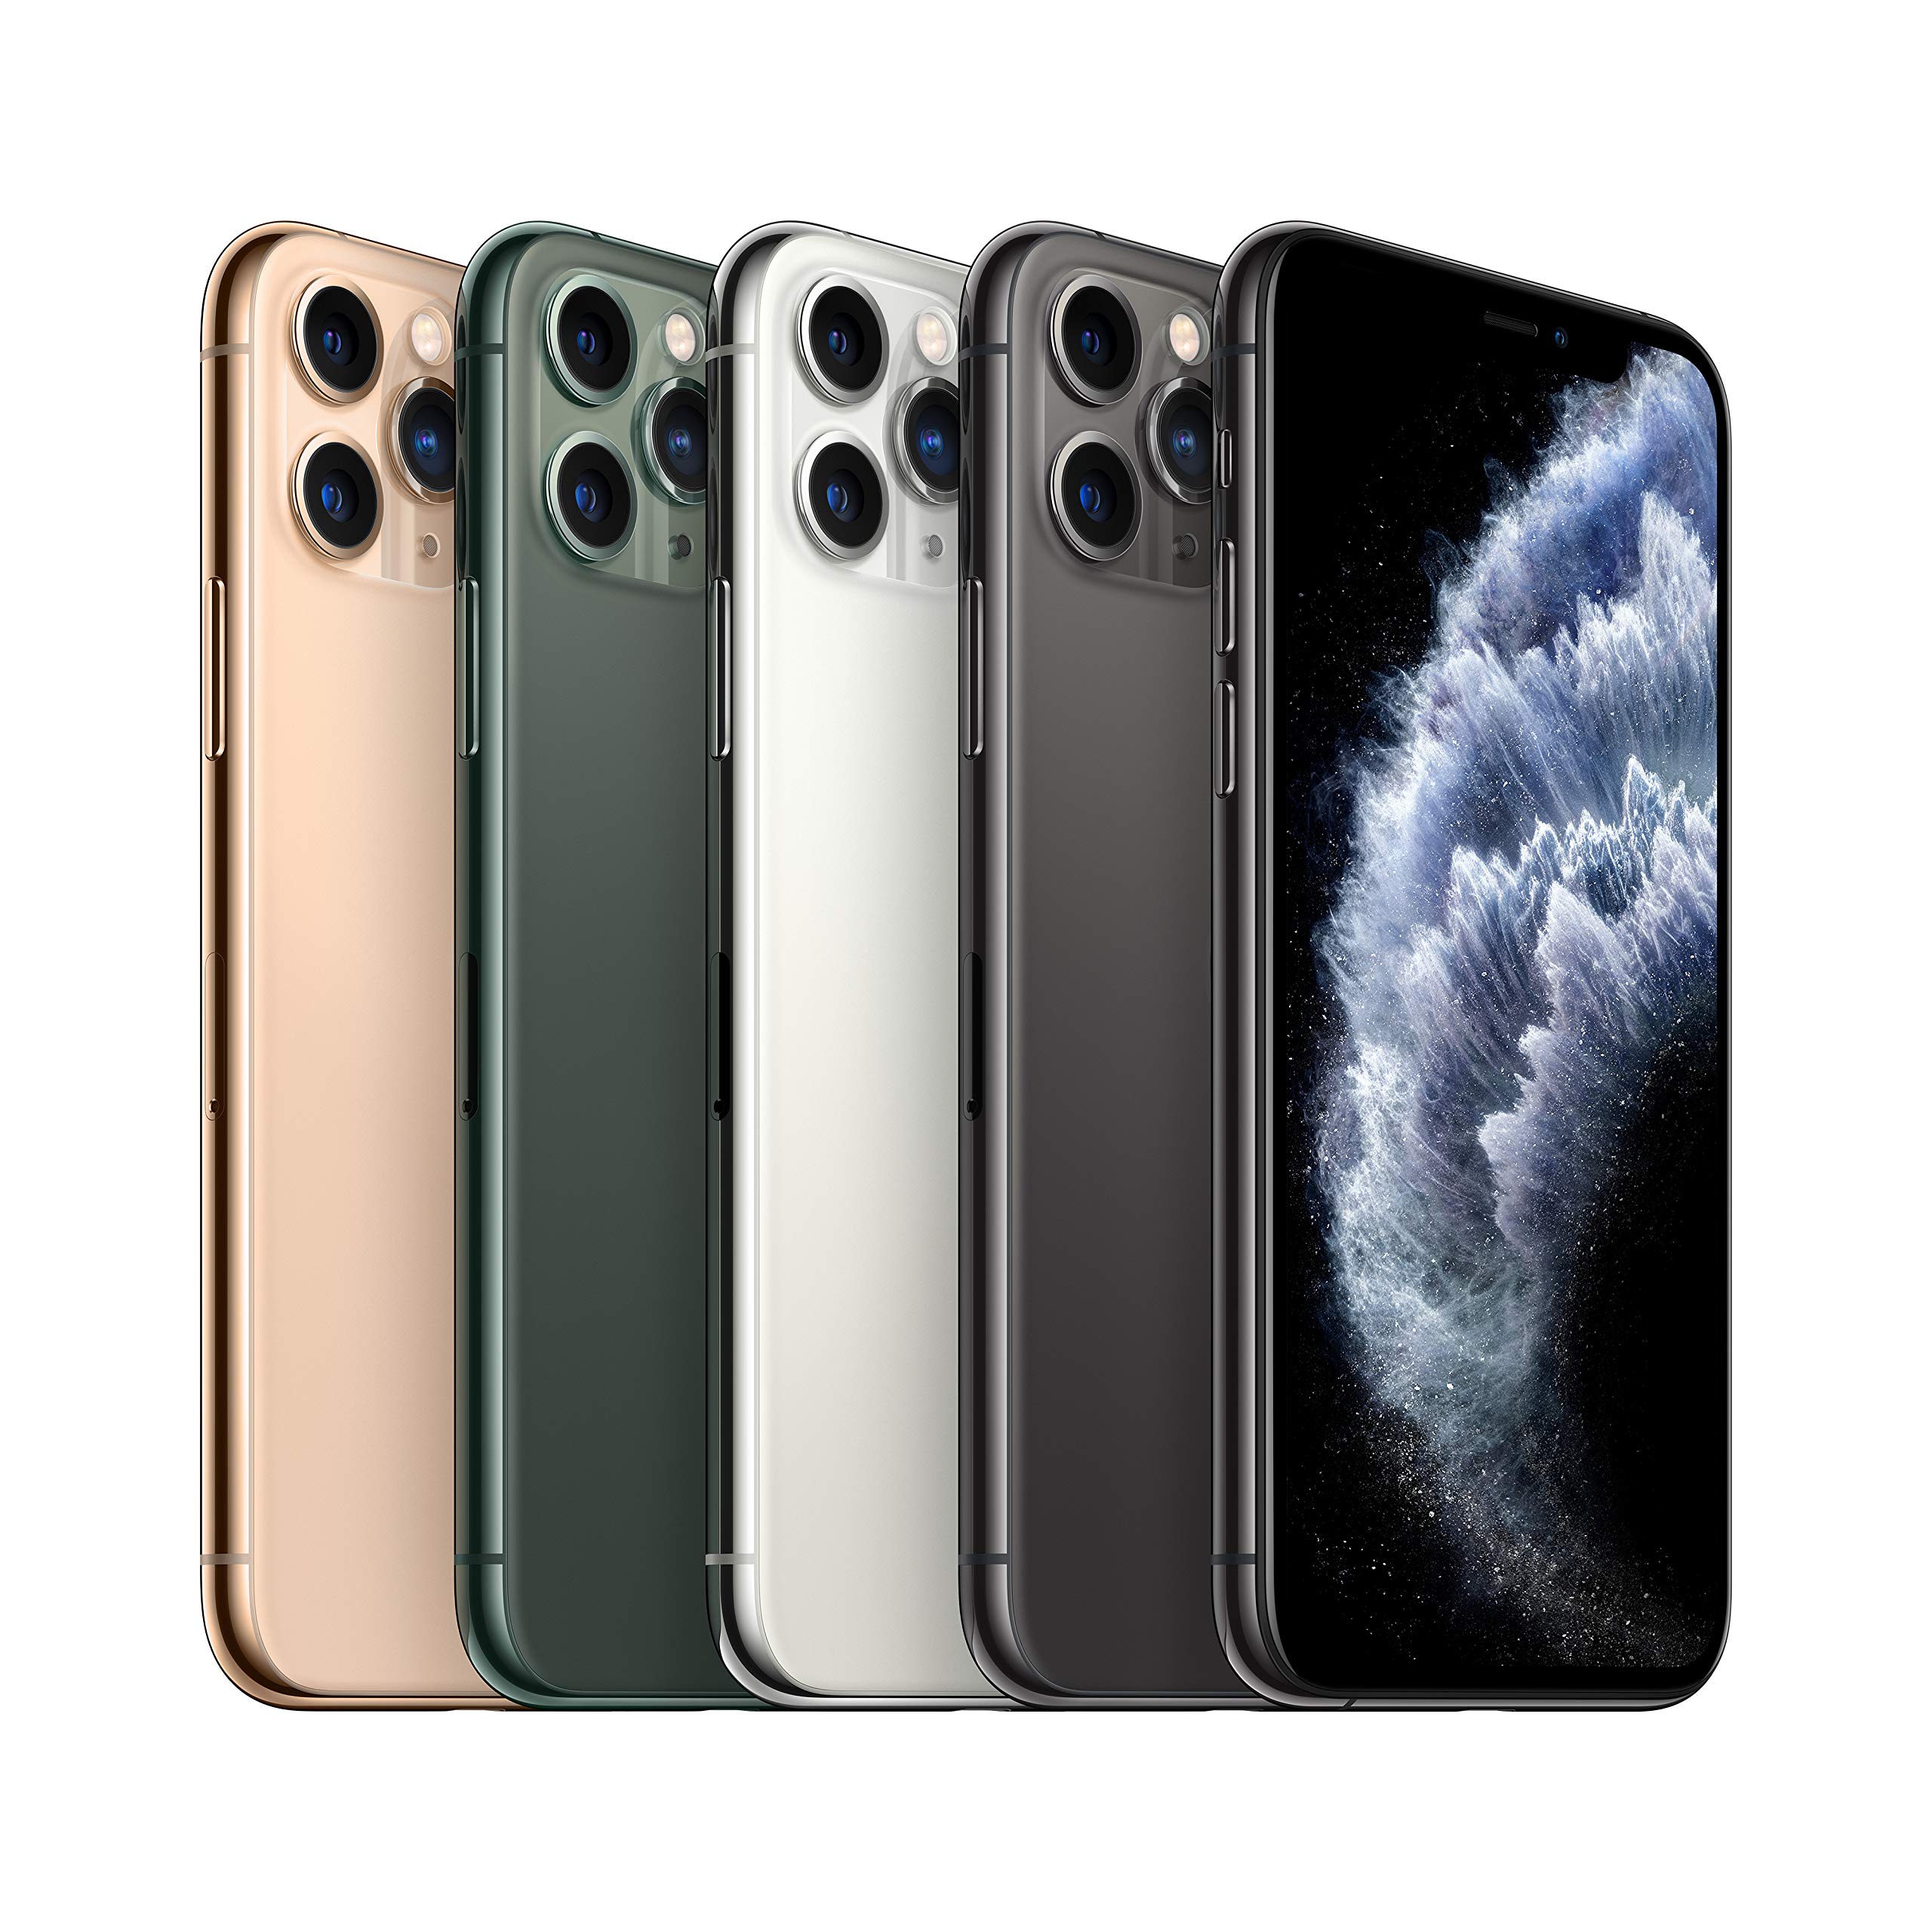 Apple iPhone 11 Pro [64GB, Silver] + Carrier Subscription [Cricket Wireless]